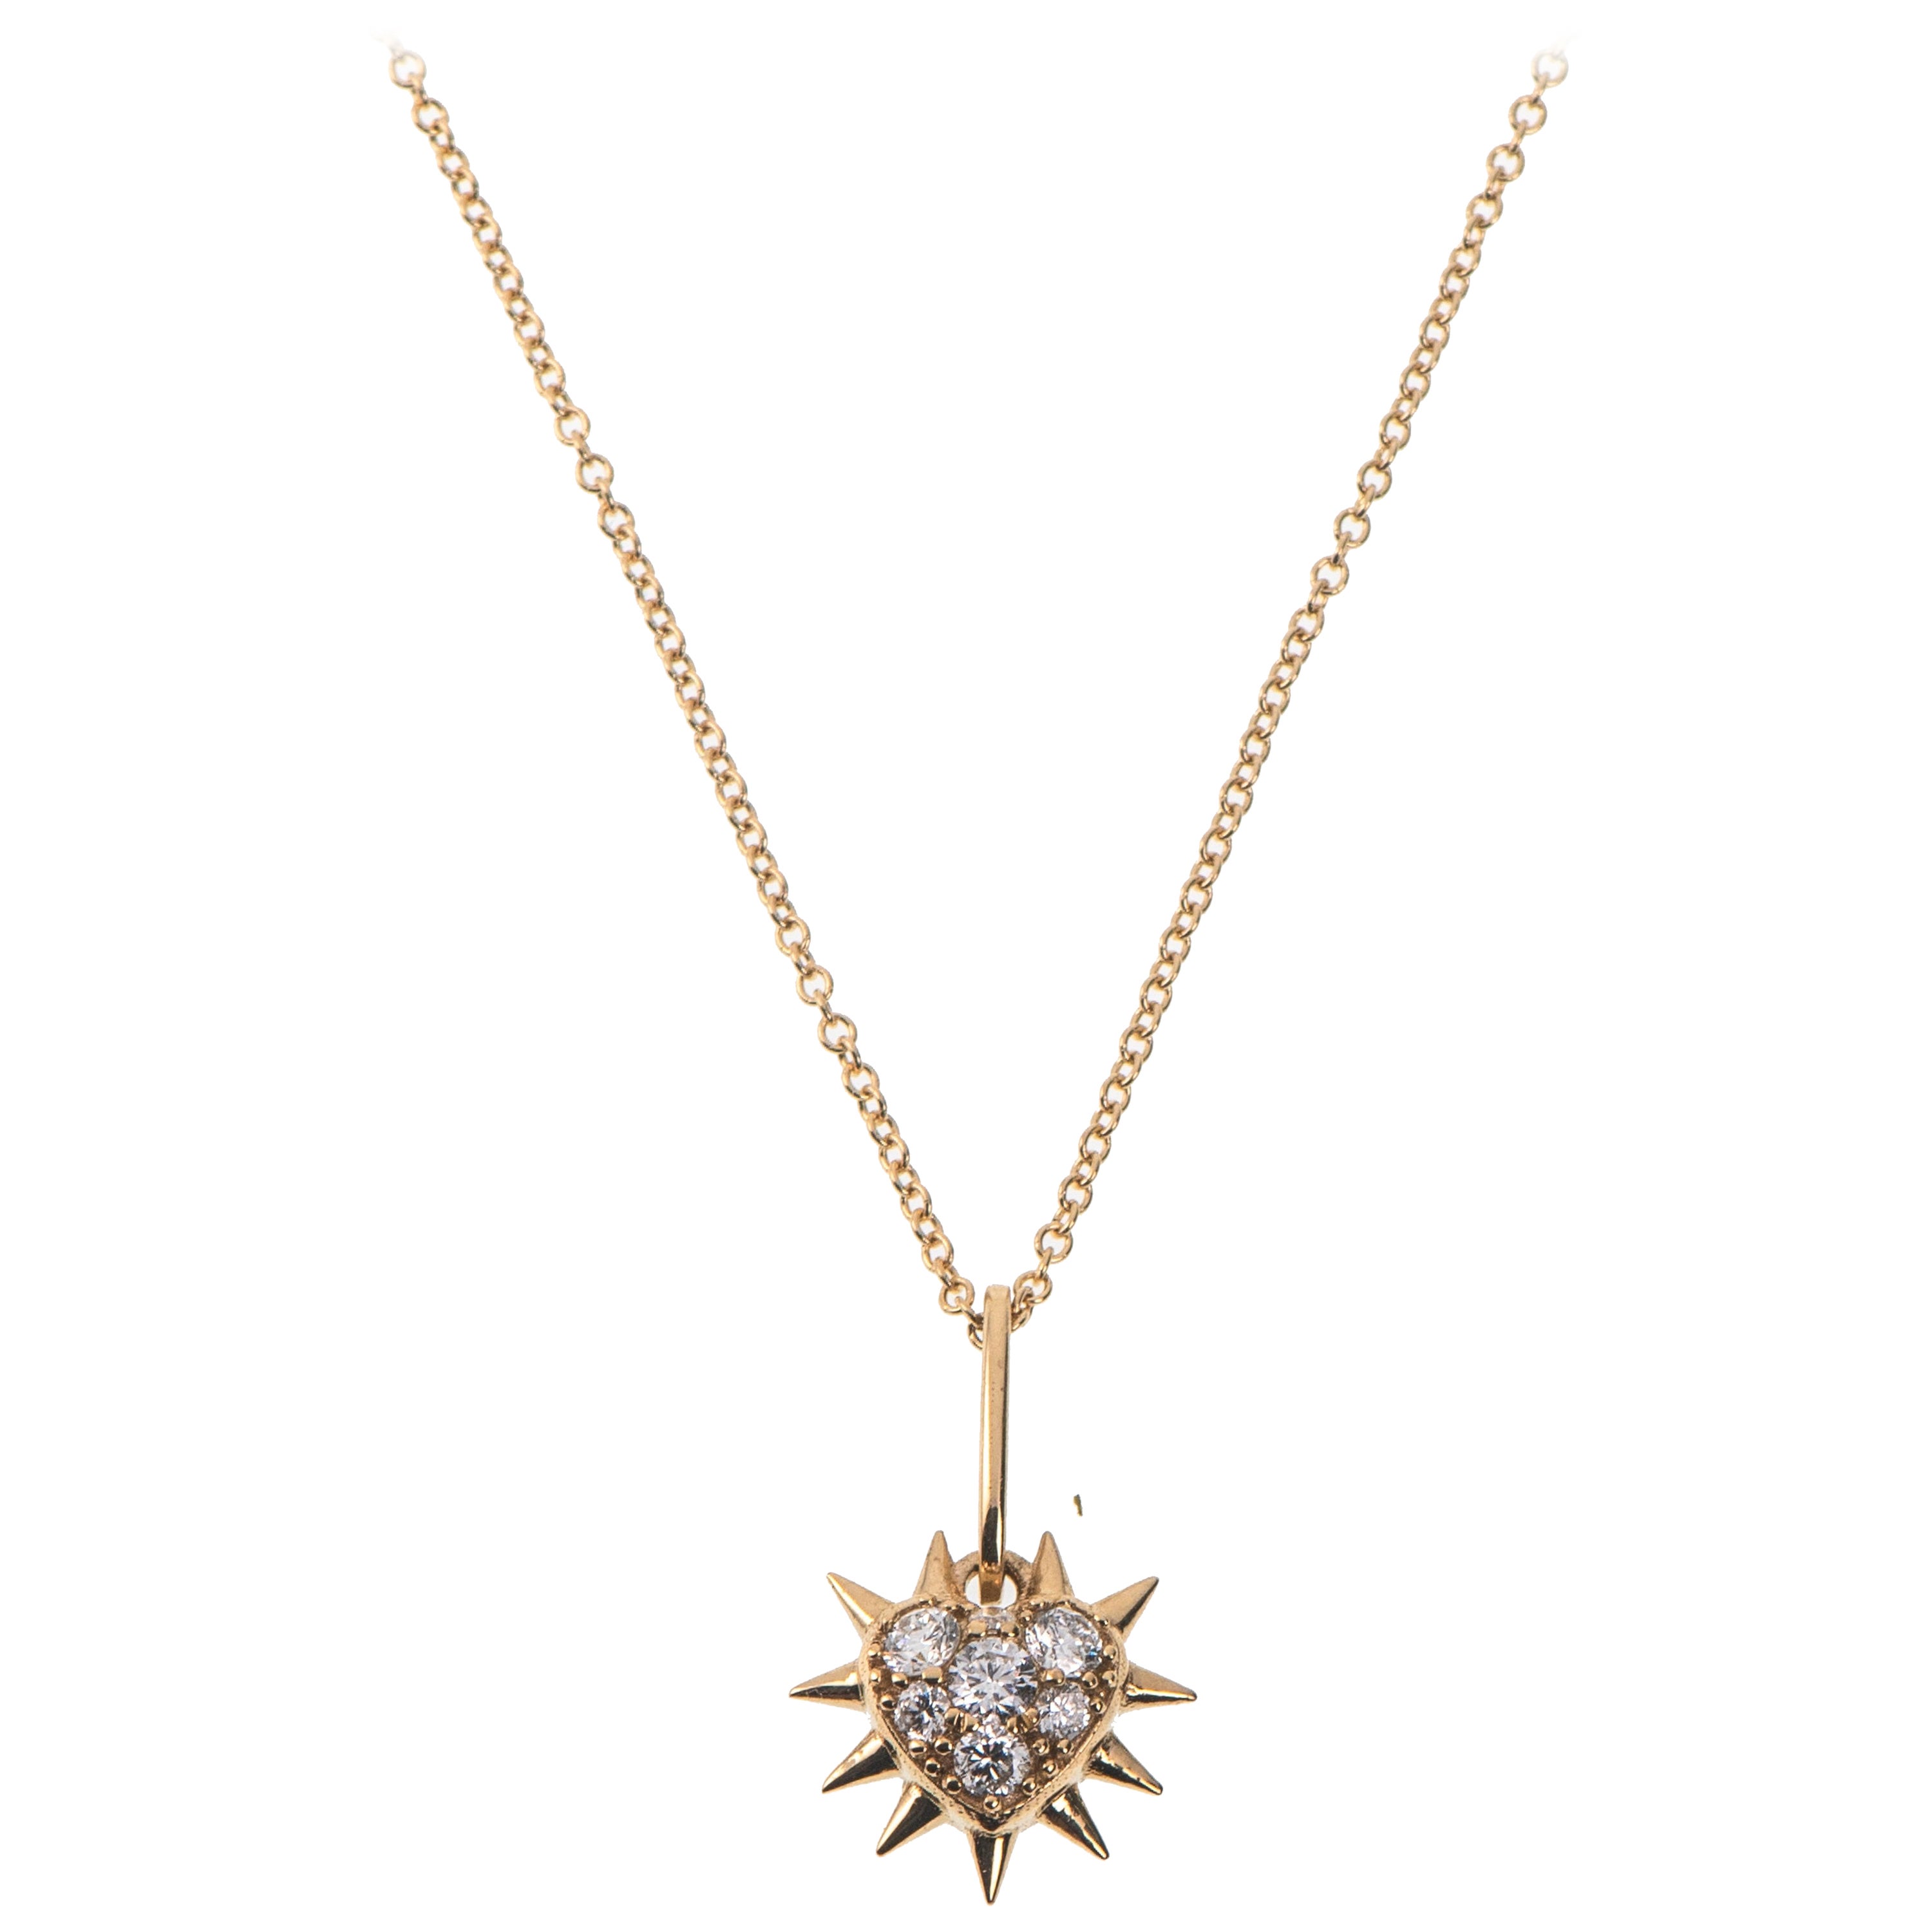 Maria Kotsoni, Contemporary 18k Gold and Diamond Thorny Heart Pendant Necklace For Sale